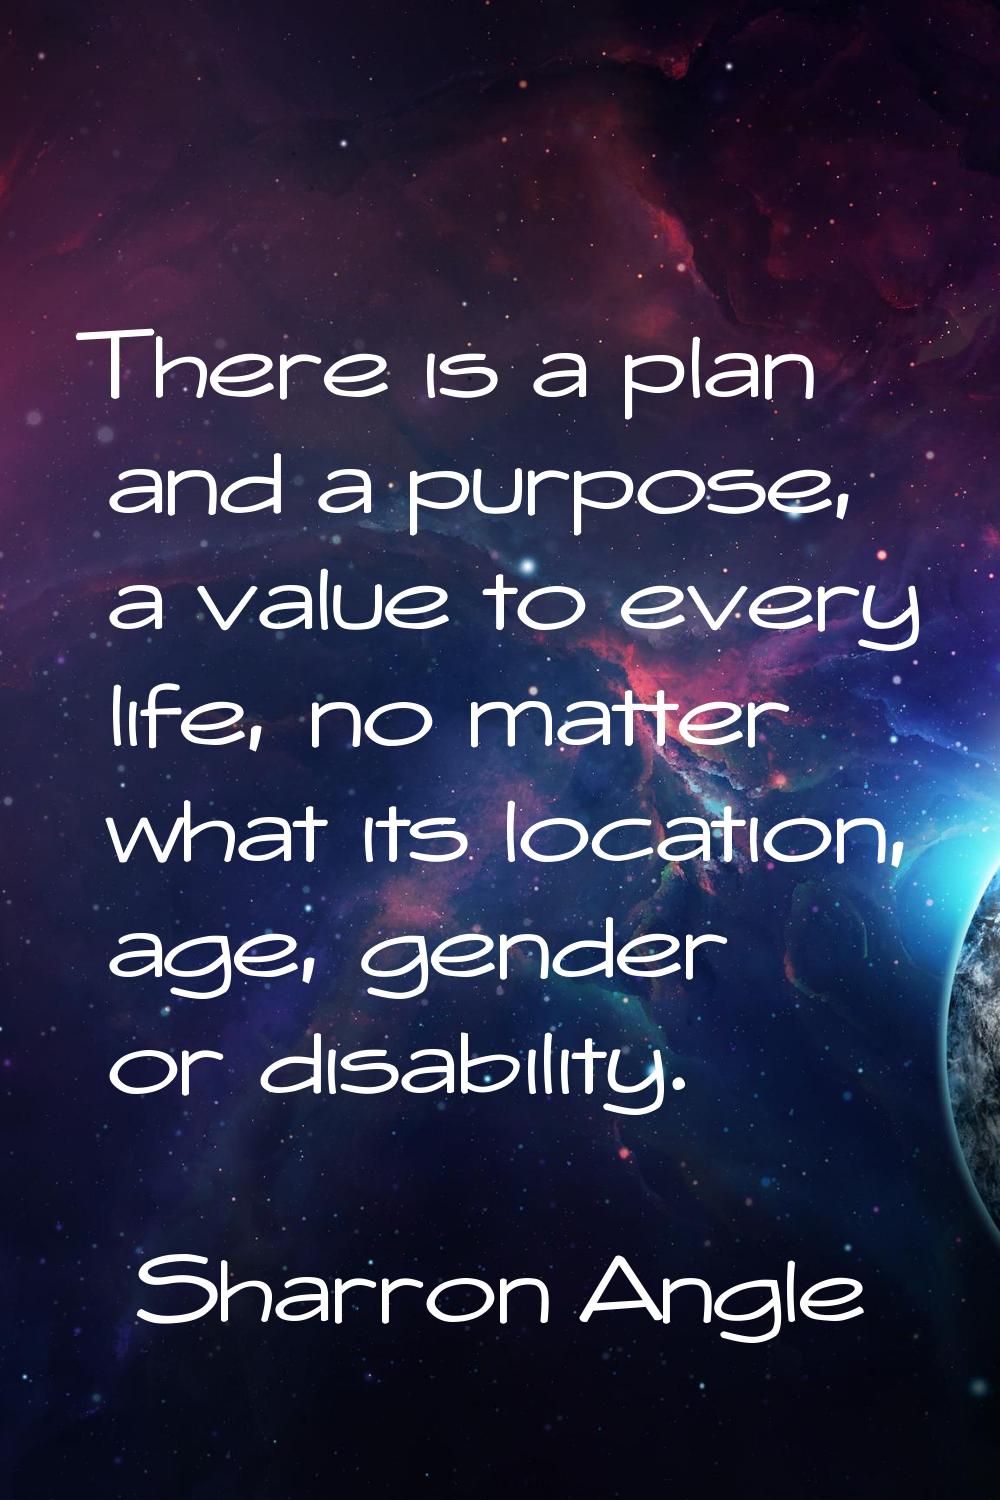 There is a plan and a purpose, a value to every life, no matter what its location, age, gender or d